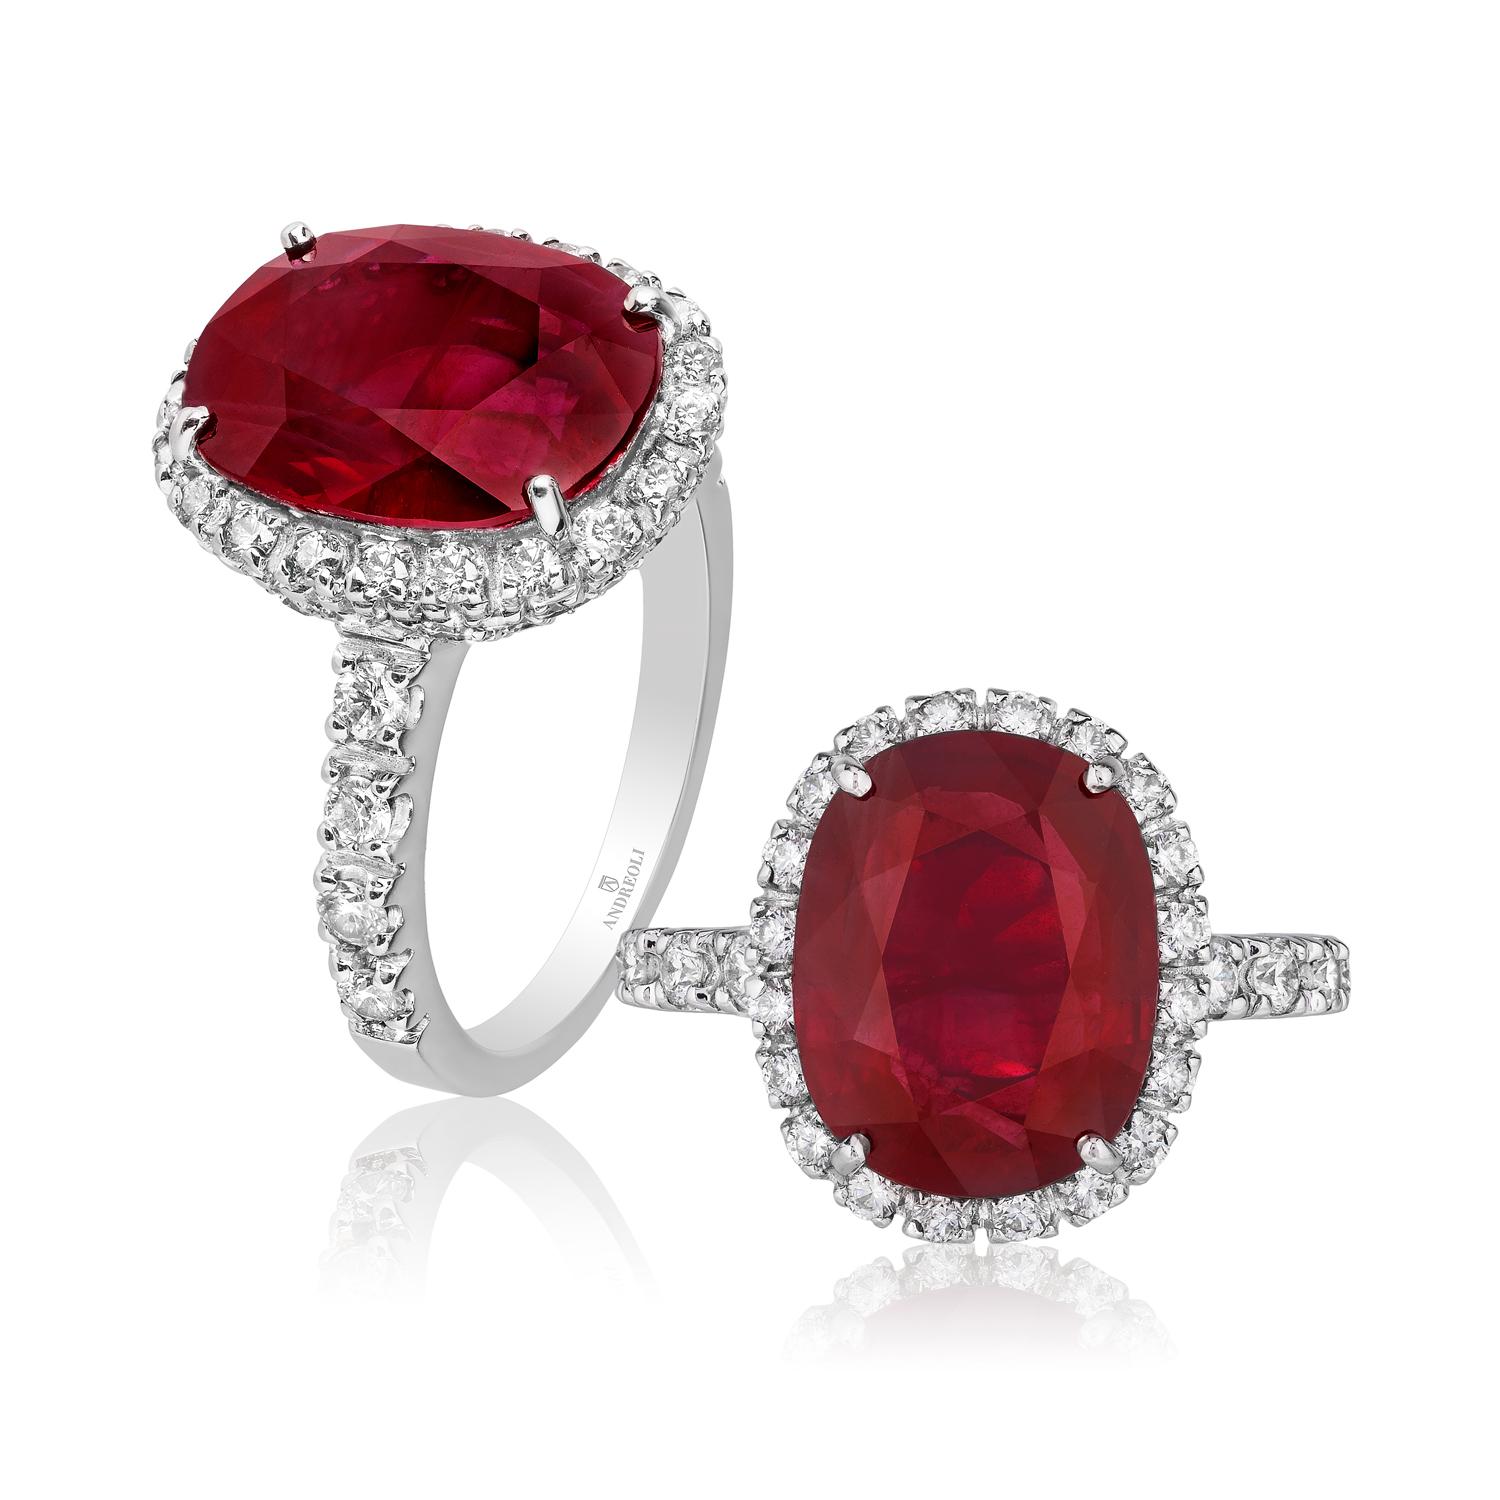 Mixed Cut Andreoli 8.28 Carat Burma Certified Ruby Diamond 18 Karat White Gold Ring For Sale